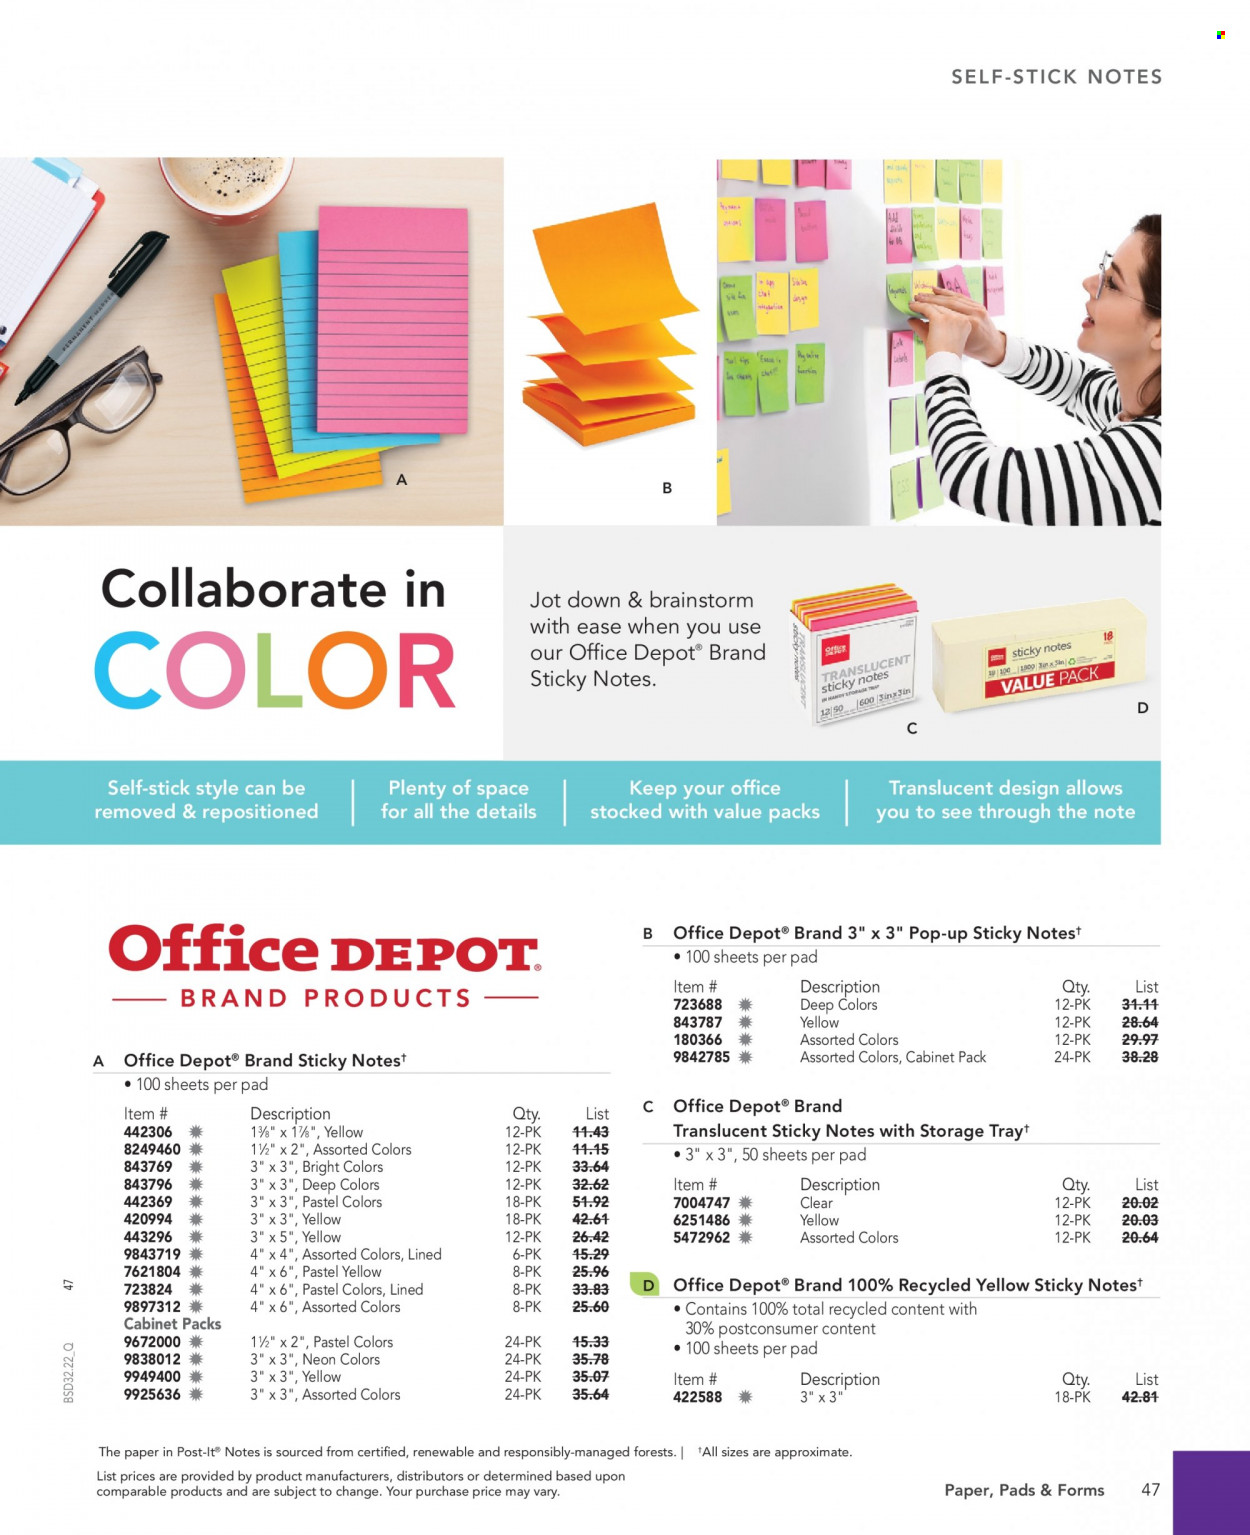 Office DEPOT flyer . Page 47.